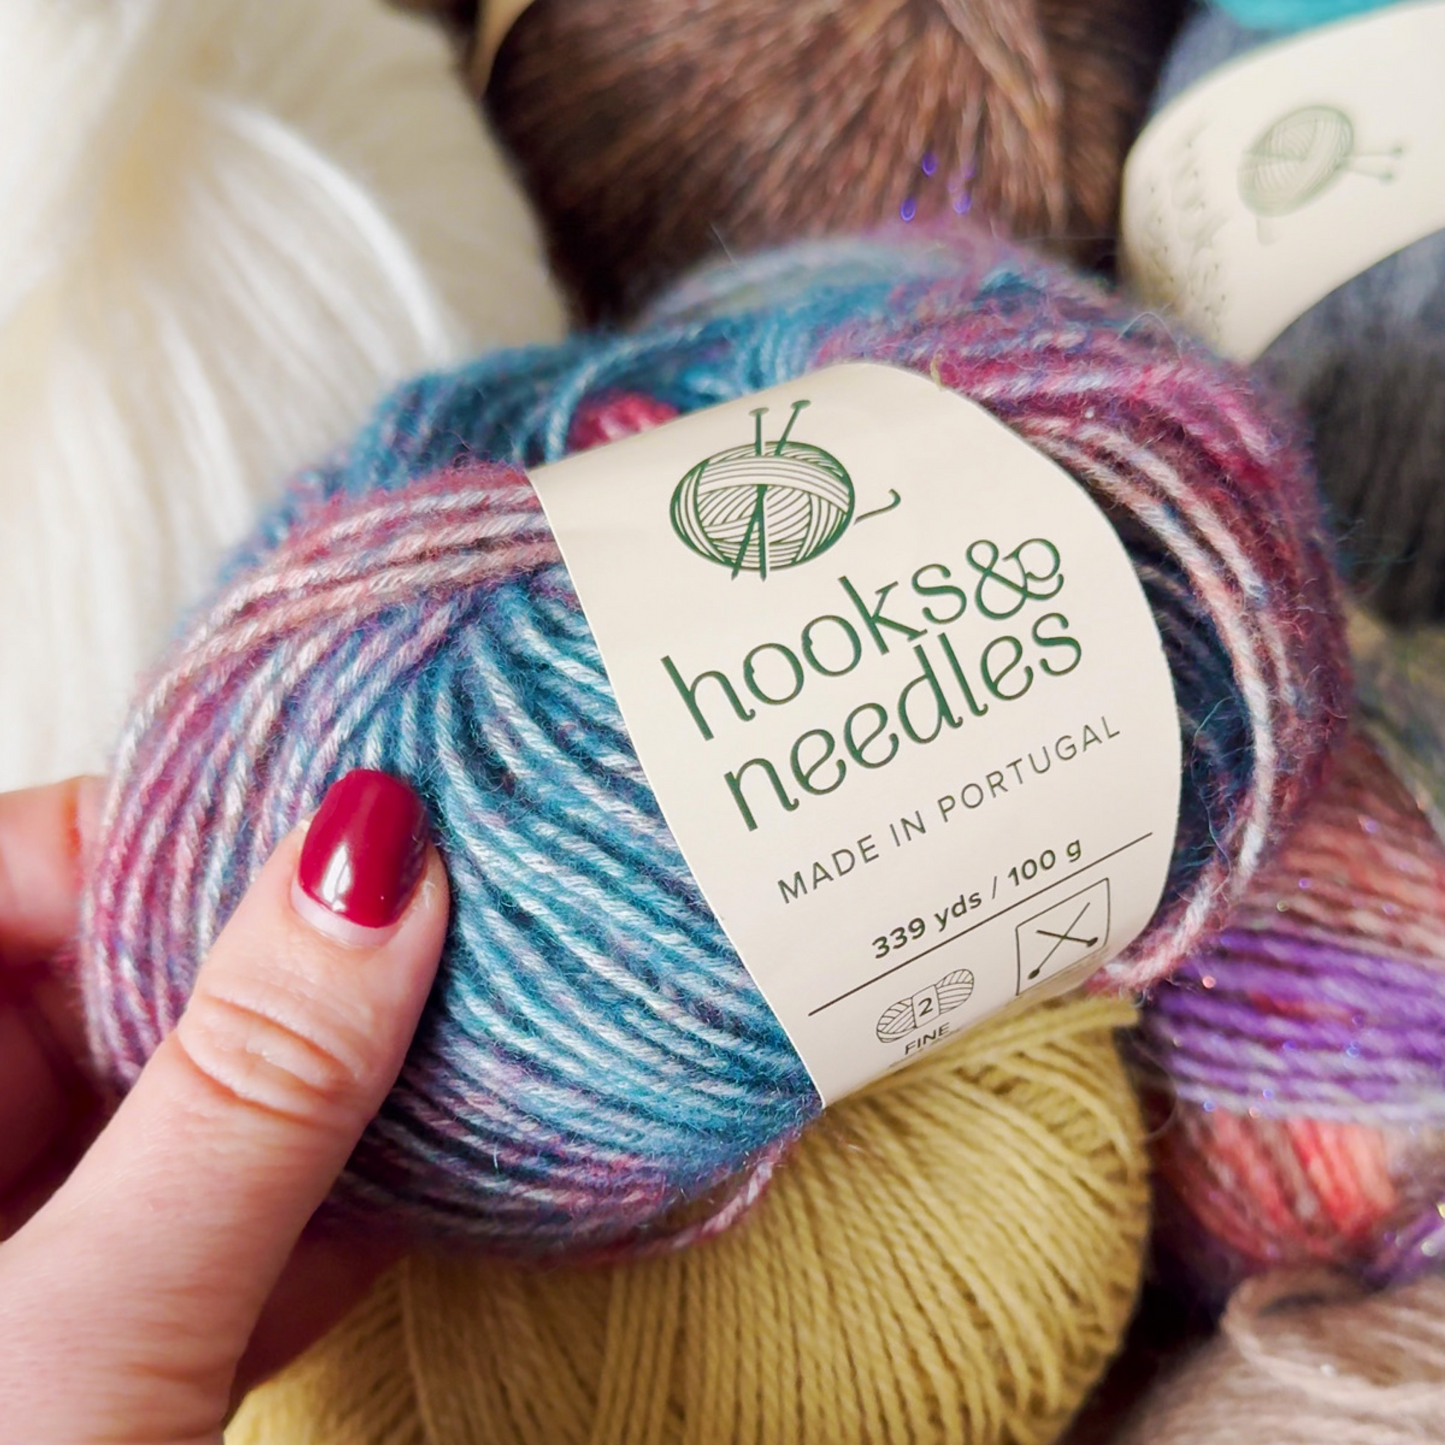 A hand holding a skein of multicolored yarn with a label "1-Month-Prepaid Hooks & Needles Subscription Box #22 made in Portugal".